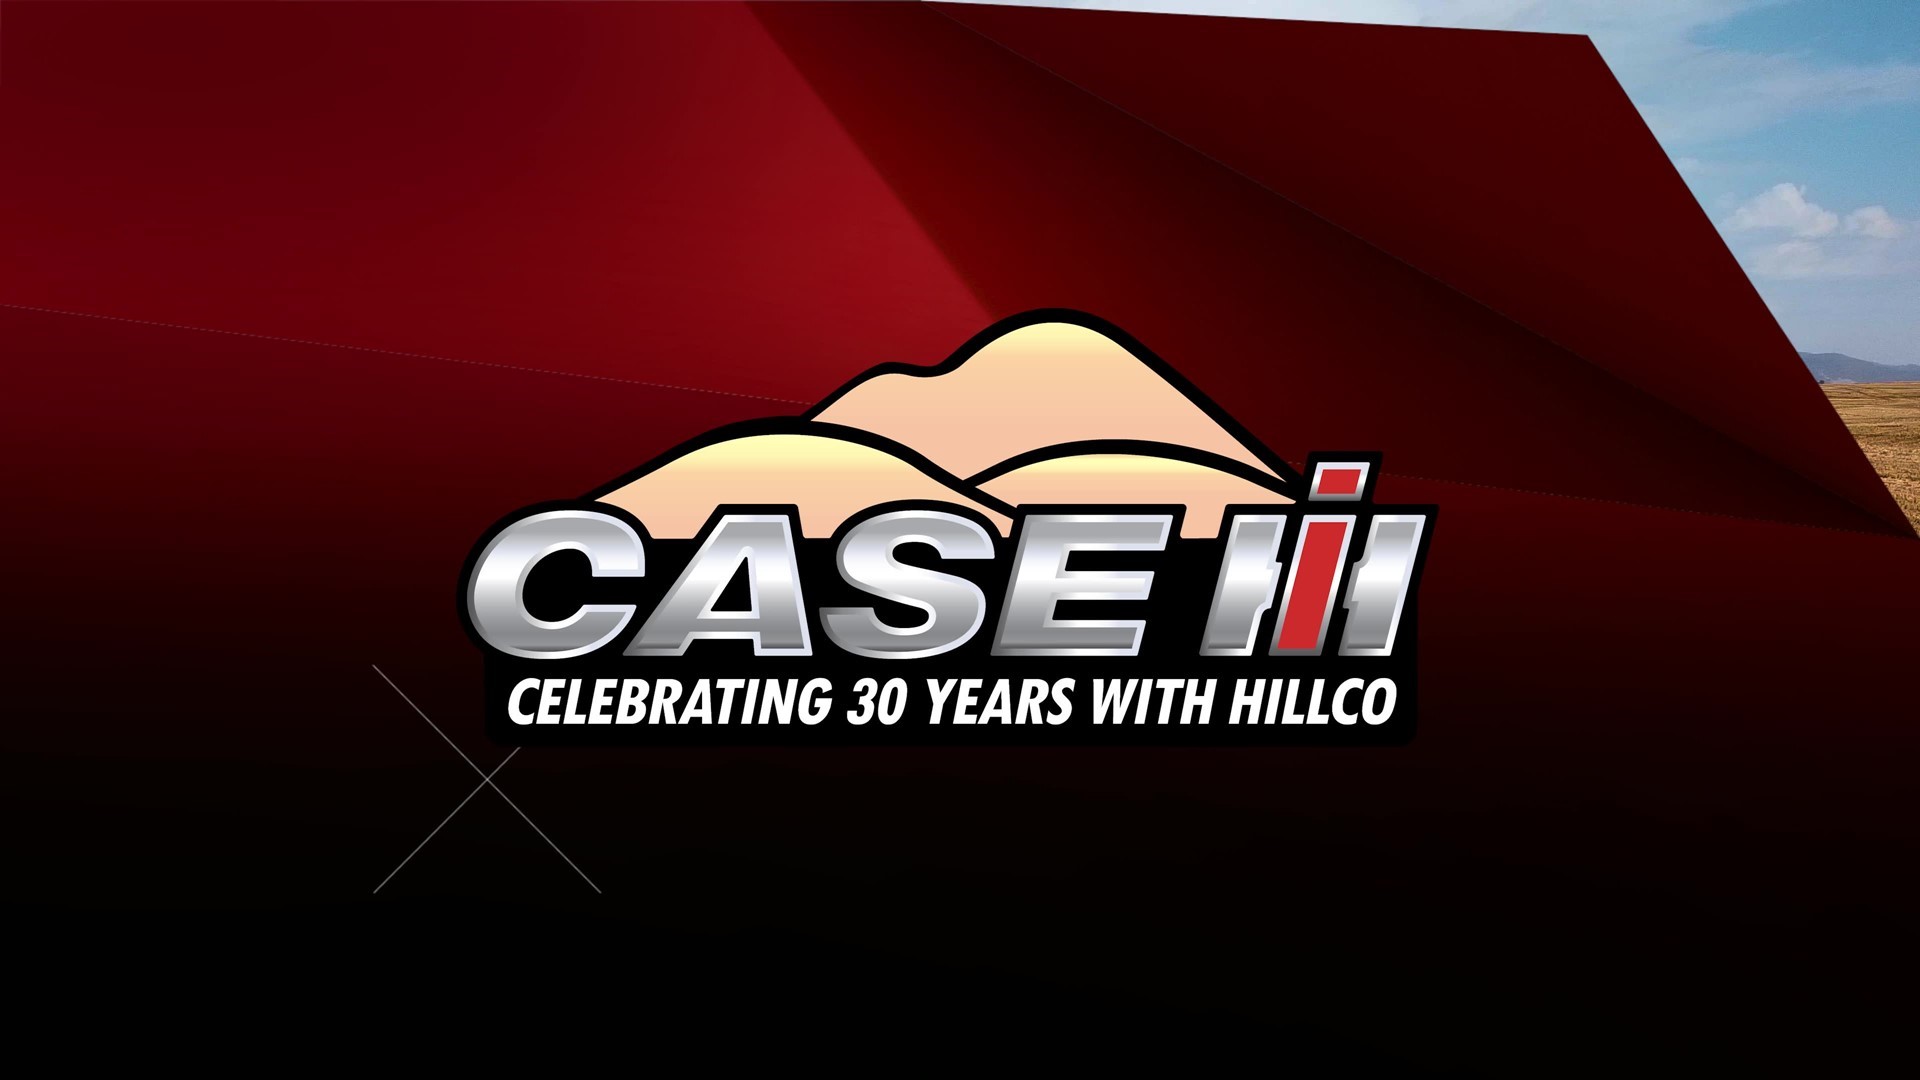 Case IH and Hillco Technologies Celebrate 30 Years of Partnership